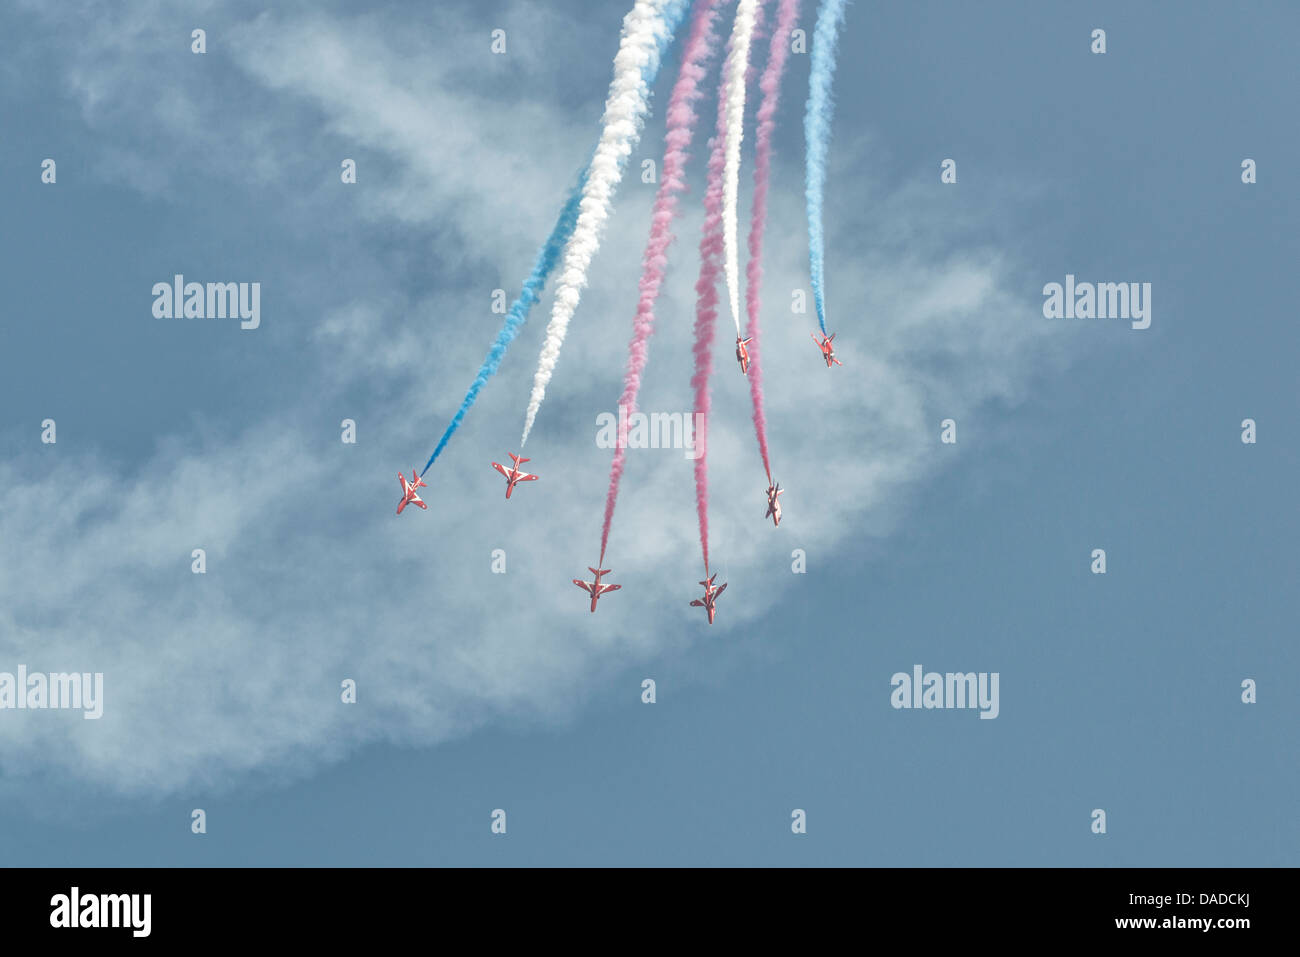 British Royal Air Force Red Arrows Military Aerobatic Display Team dive out of the sky in their Hawk Jet Trainers Stock Photo